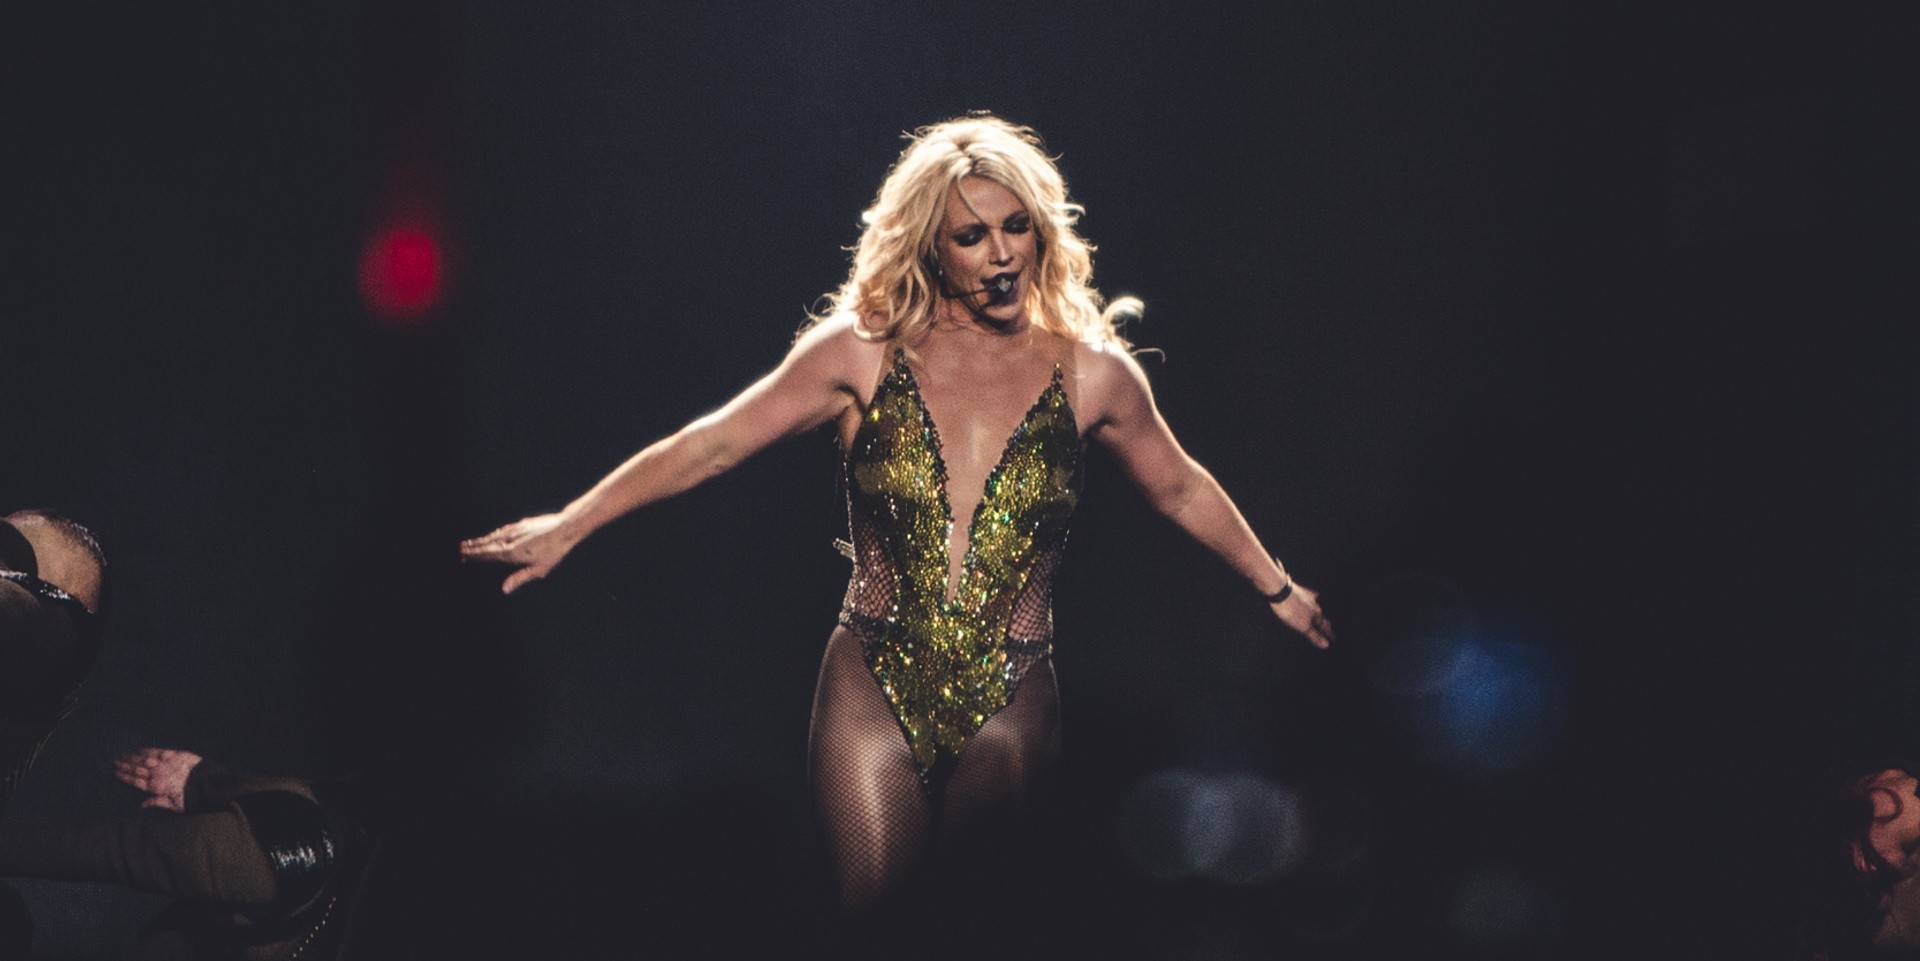 Britney Spears' Singapore show is the most expensive of 2017